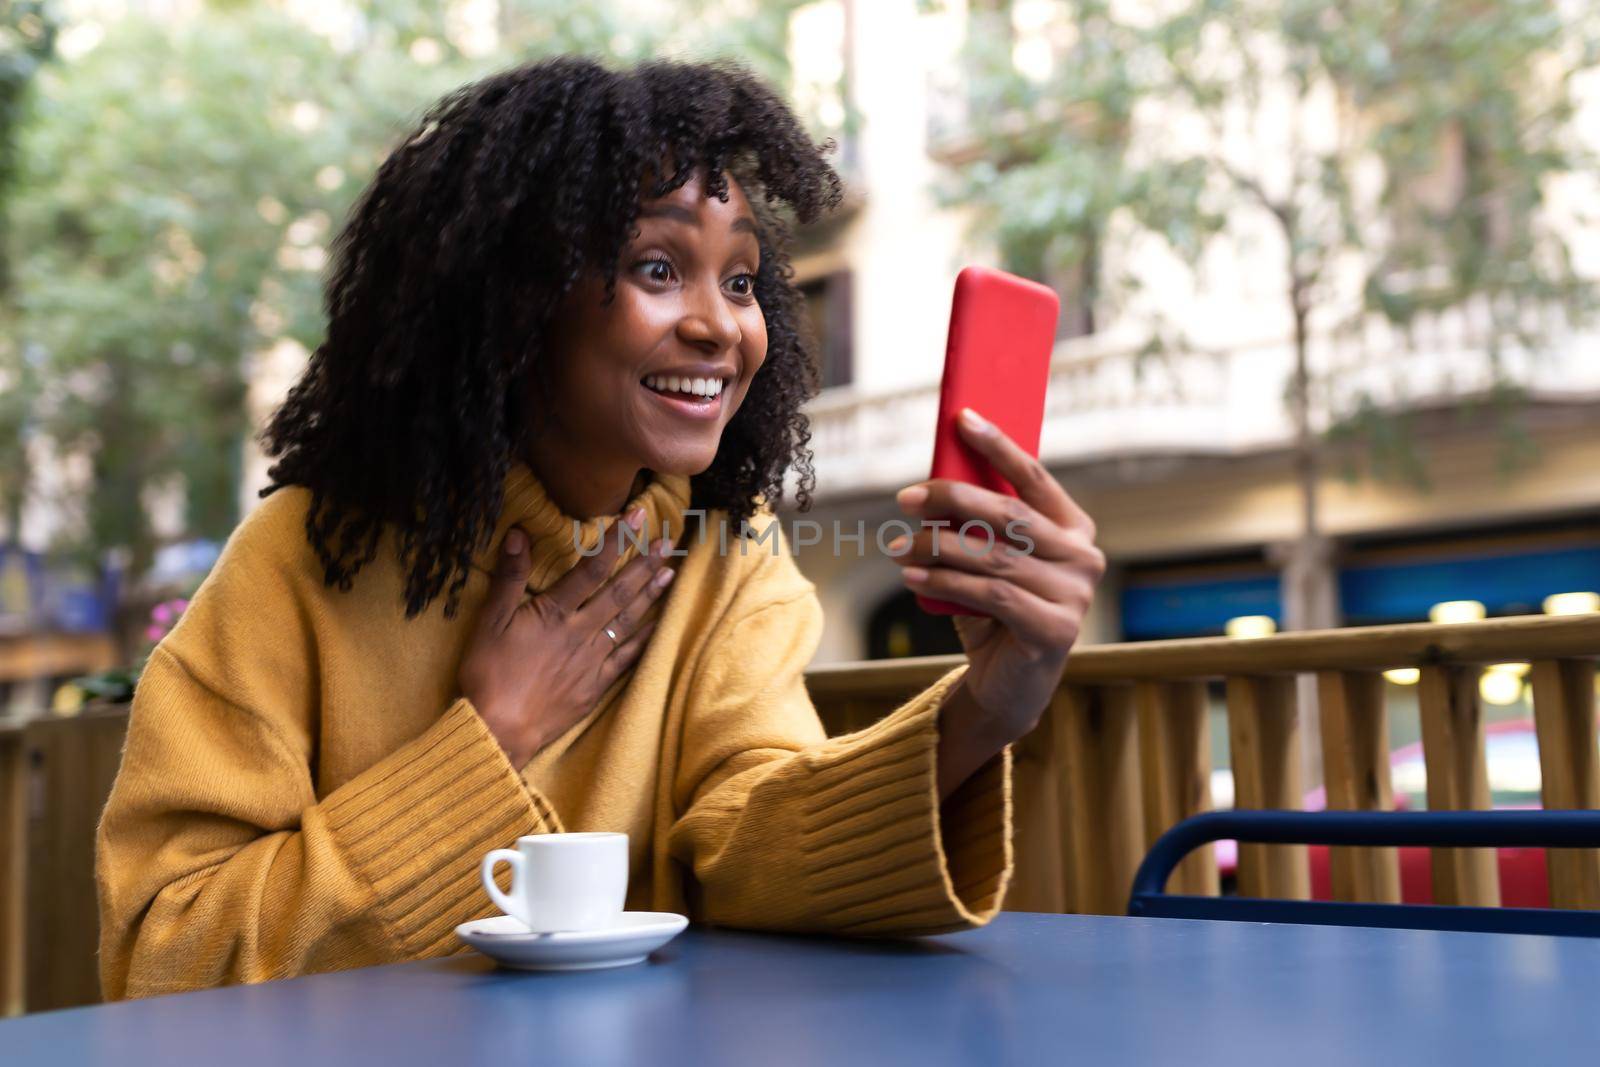 Young African American woman with surprise expression on video call using smartphone in outdoors coffee shop. Copy space. Lifestyle and technology concept.